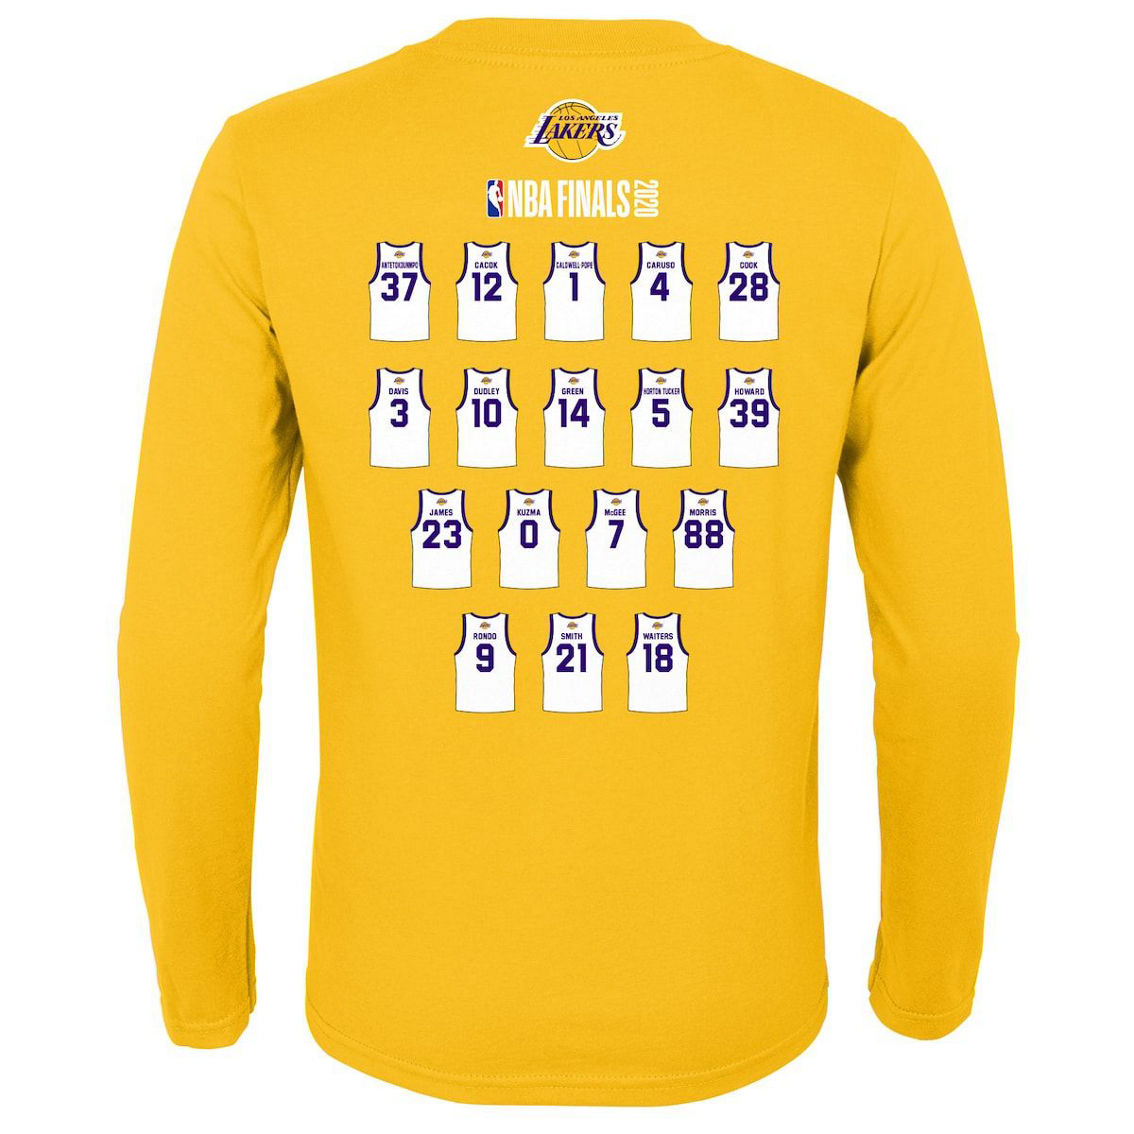 Outerstuff Youth Gold Los Angeles Lakers 2020 NBA Finals s Roster Long Sleeve T-Shirt - Image 4 of 4